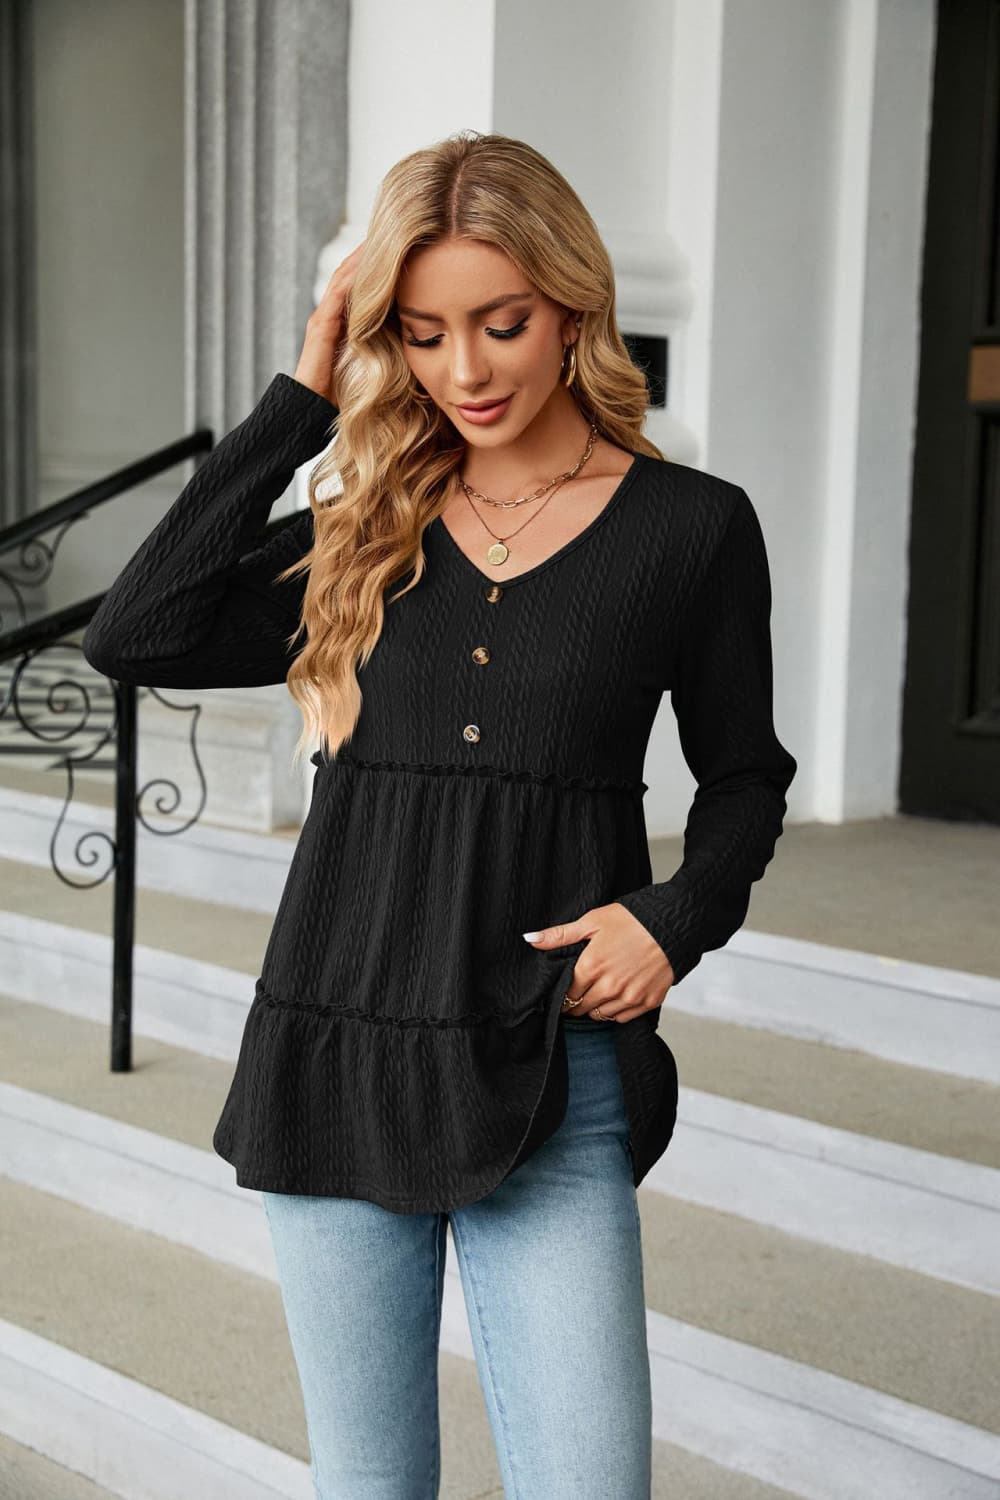 Long Sleeve V-Neck Cable-Knit Blouse - Women’s Clothing & Accessories - Shirts & Tops - 23 - 2024